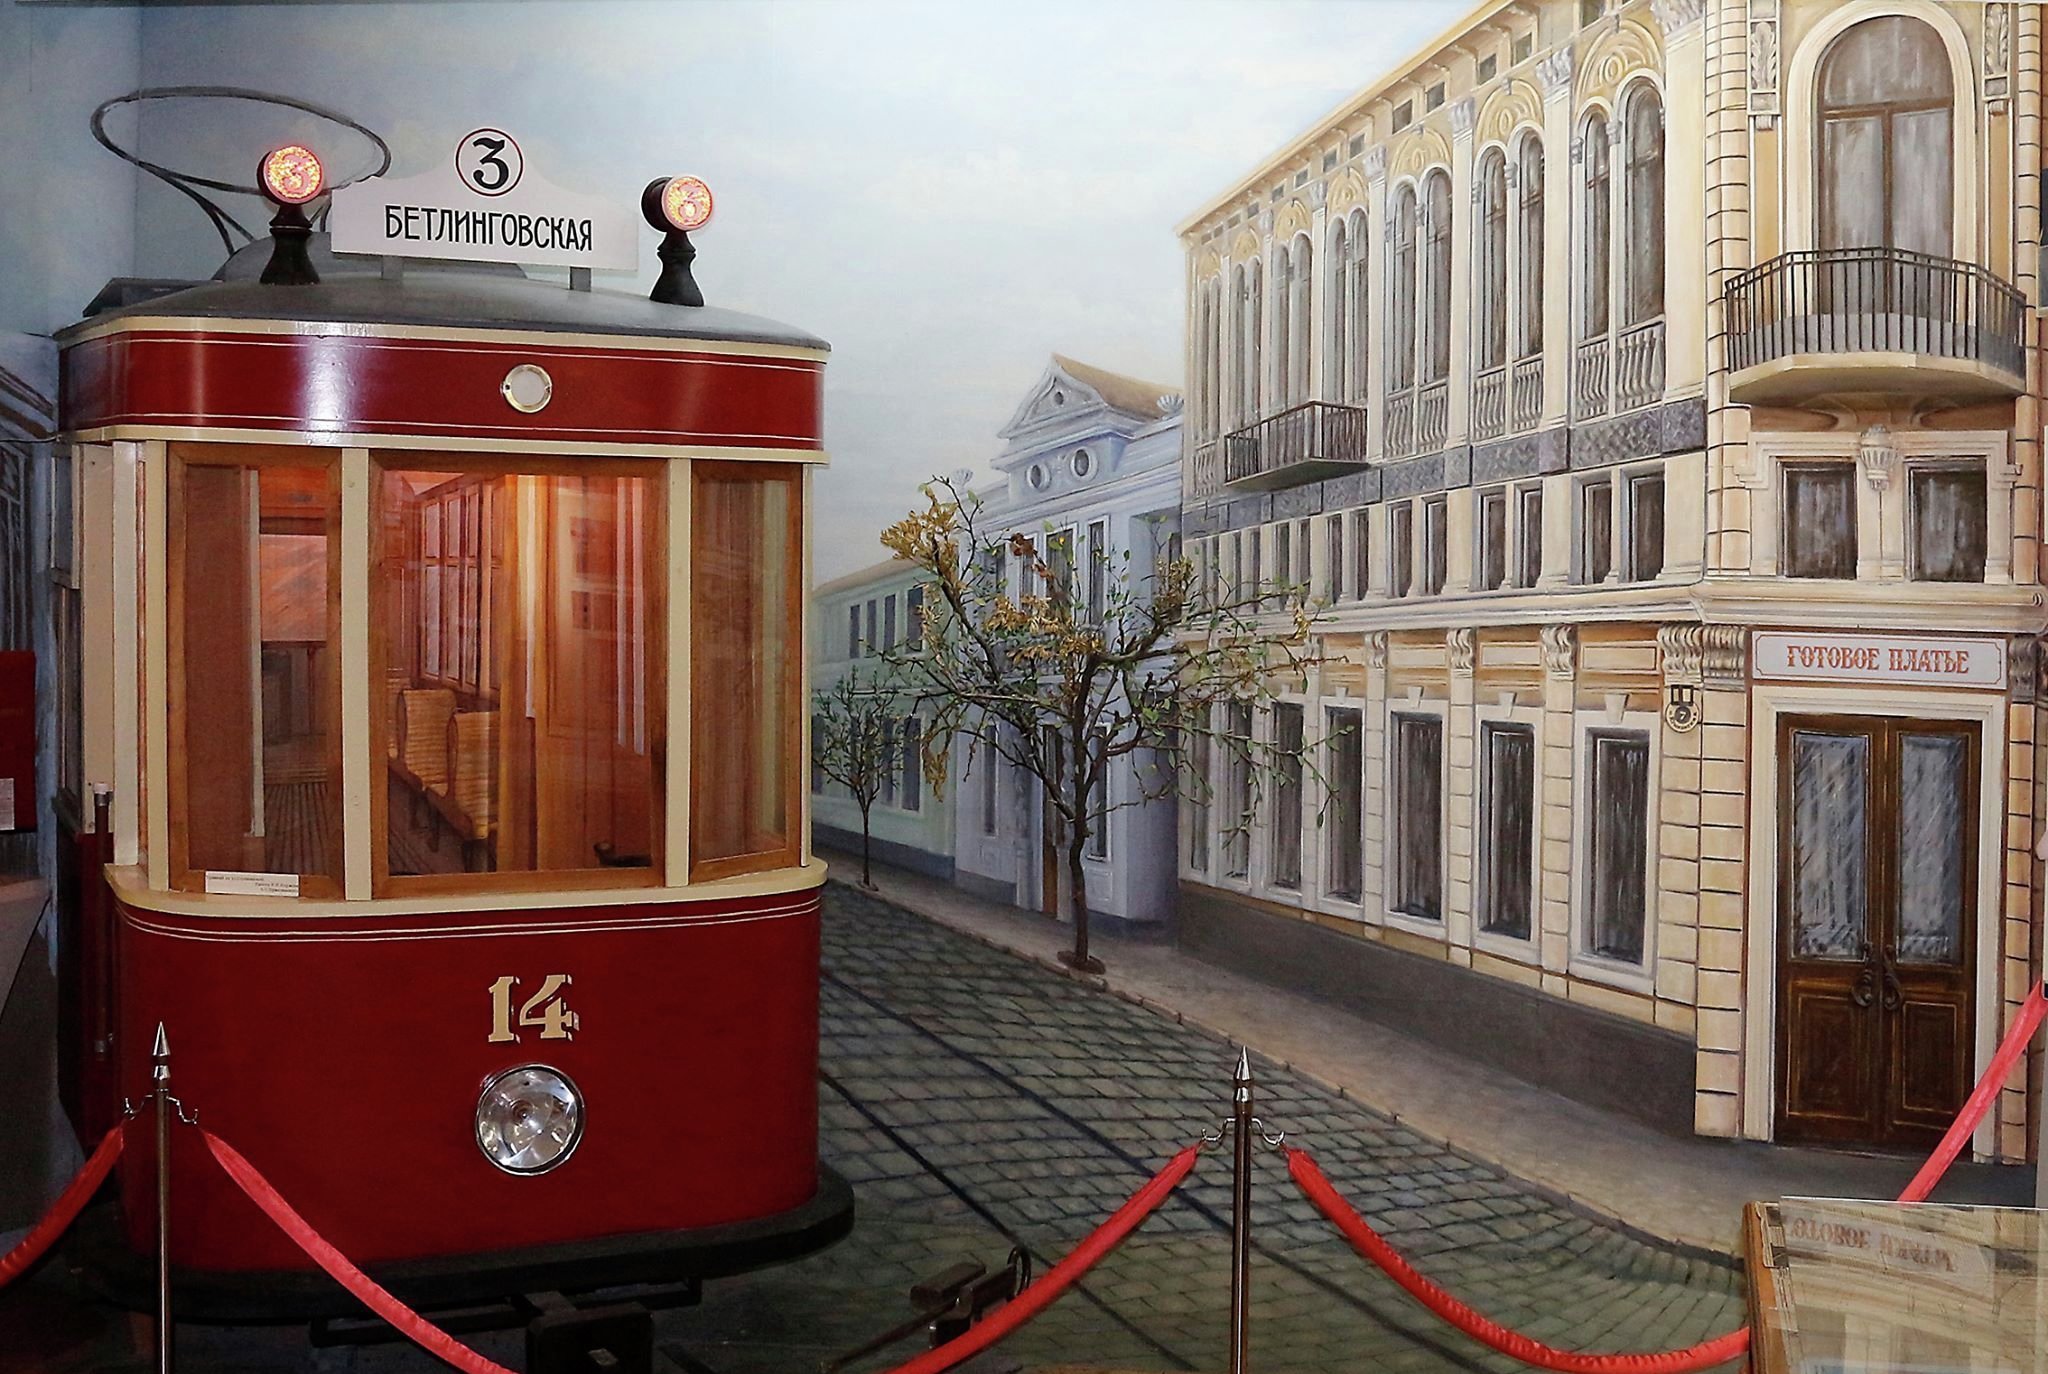 Museum of the History of Tram and Trolleybus